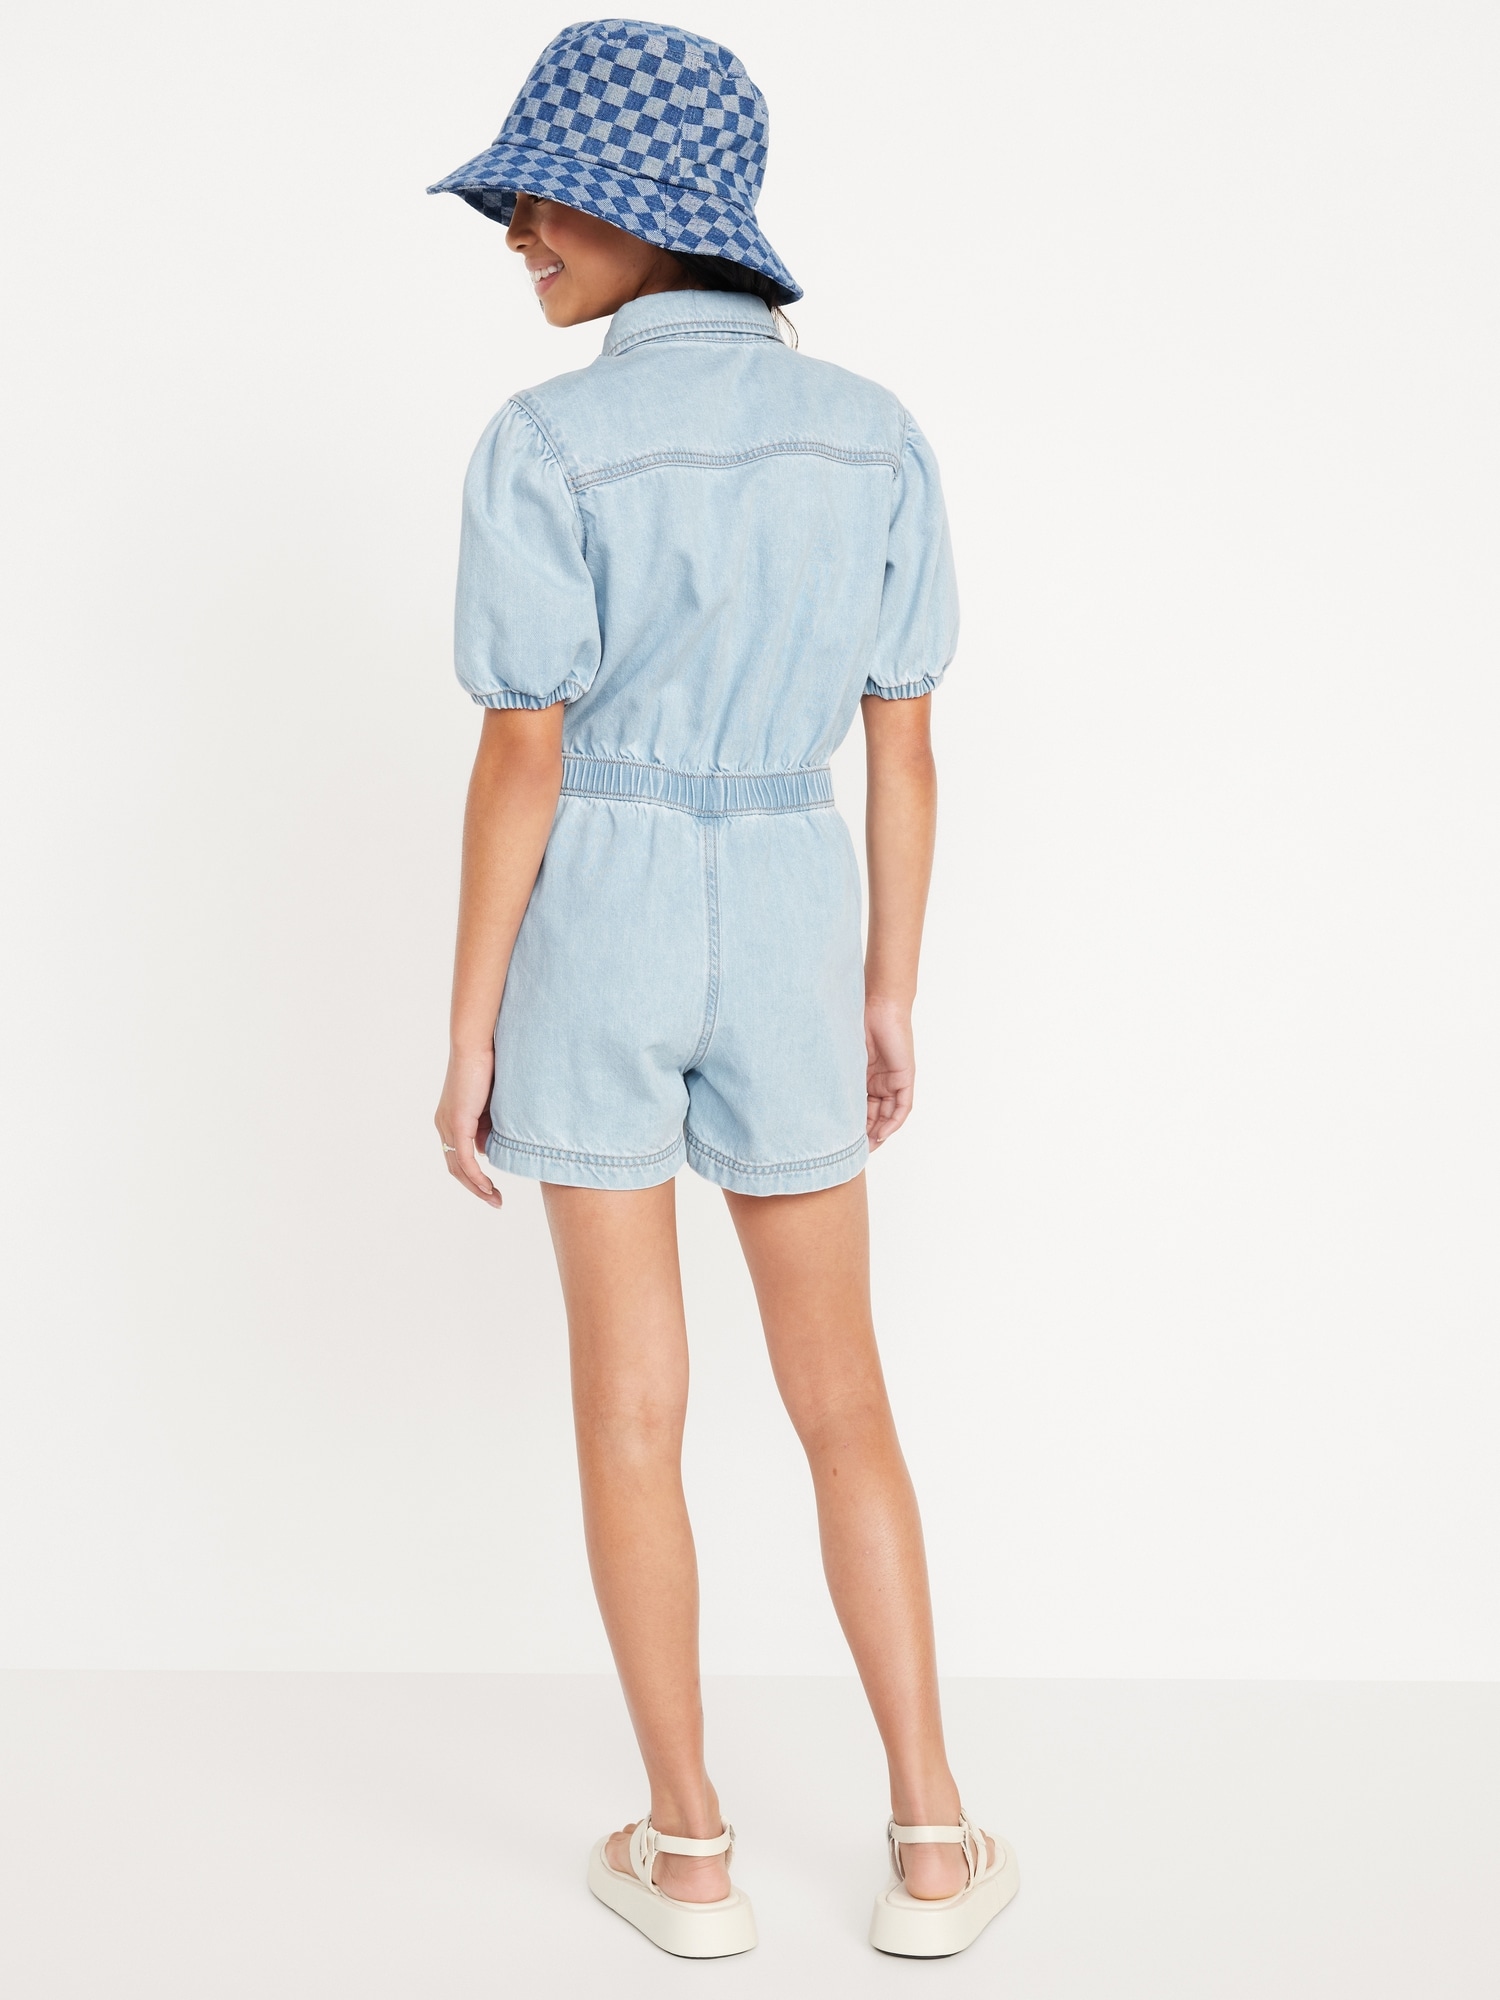 Puff-Sleeve Utility Jean Romper for Girls